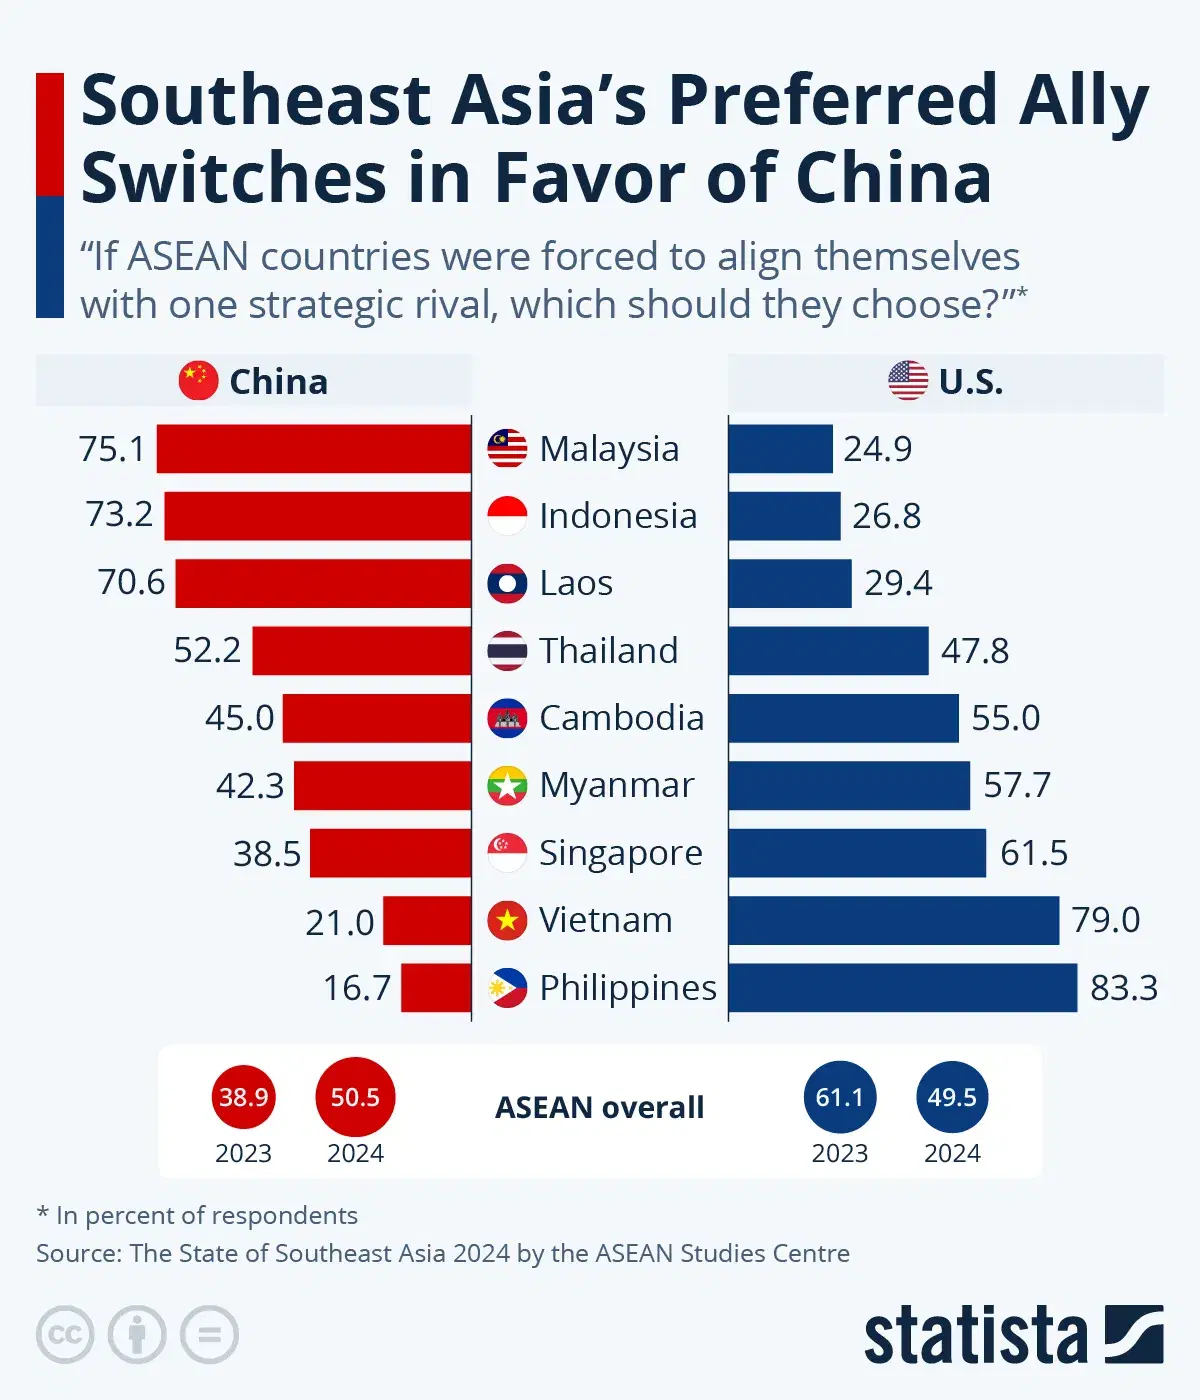 Southeast Asia's Preferred Ally Switches in Favor of China